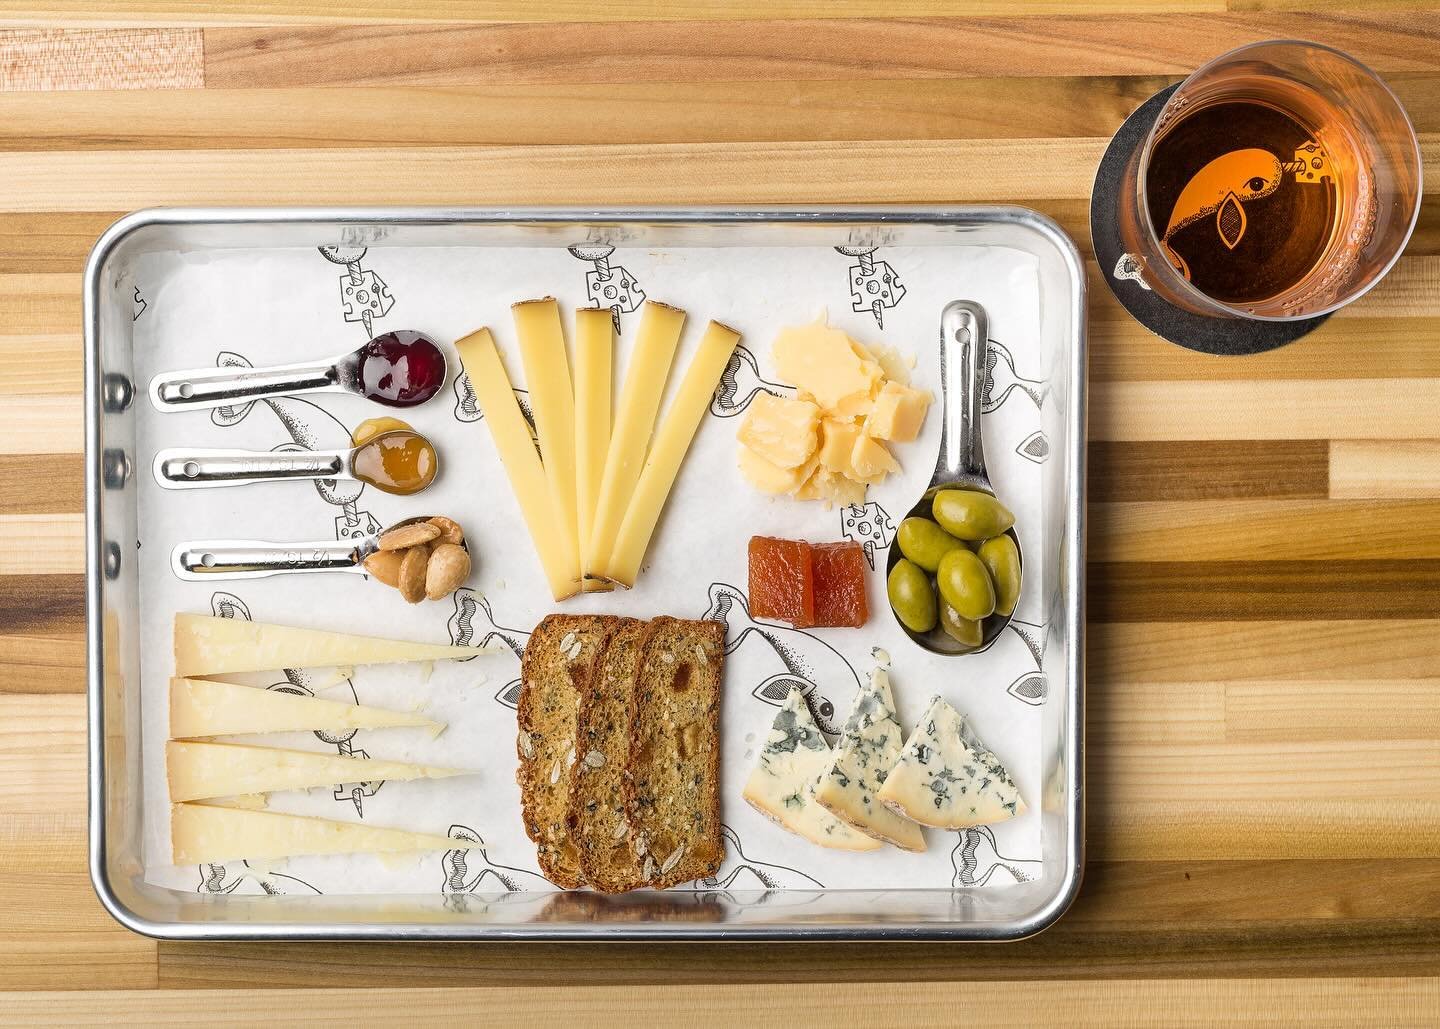 Mom&rsquo;s love cheese. This board special will run Saturday for $20. 4 types of cheese plus accoutrements for dine in or take to @beerdbrewing_thesilo #connecticut #cheese #cheeseboard #mysticct #thingstodoinconnecticut #connecticutfoodie #connecti